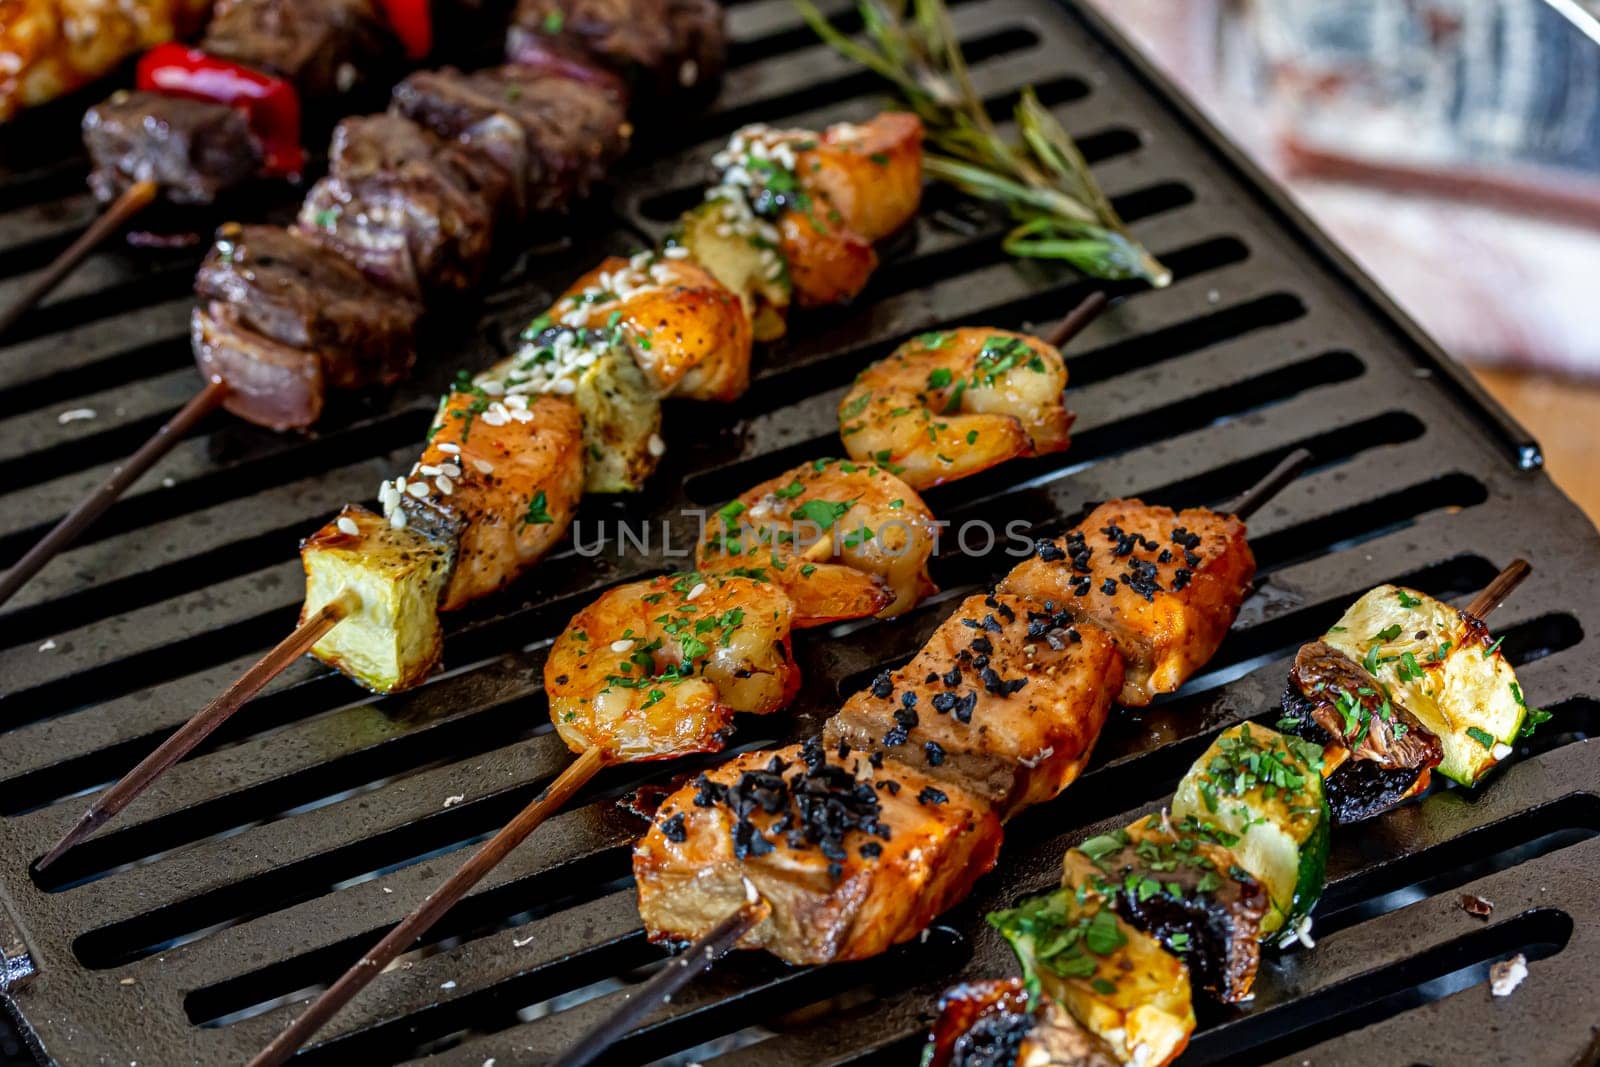 A lot of mini-kebabs of meat, fish, chicken, shrimp, vegetables on wooden skewers are fried on a small cast-iron grill by Milanchikov